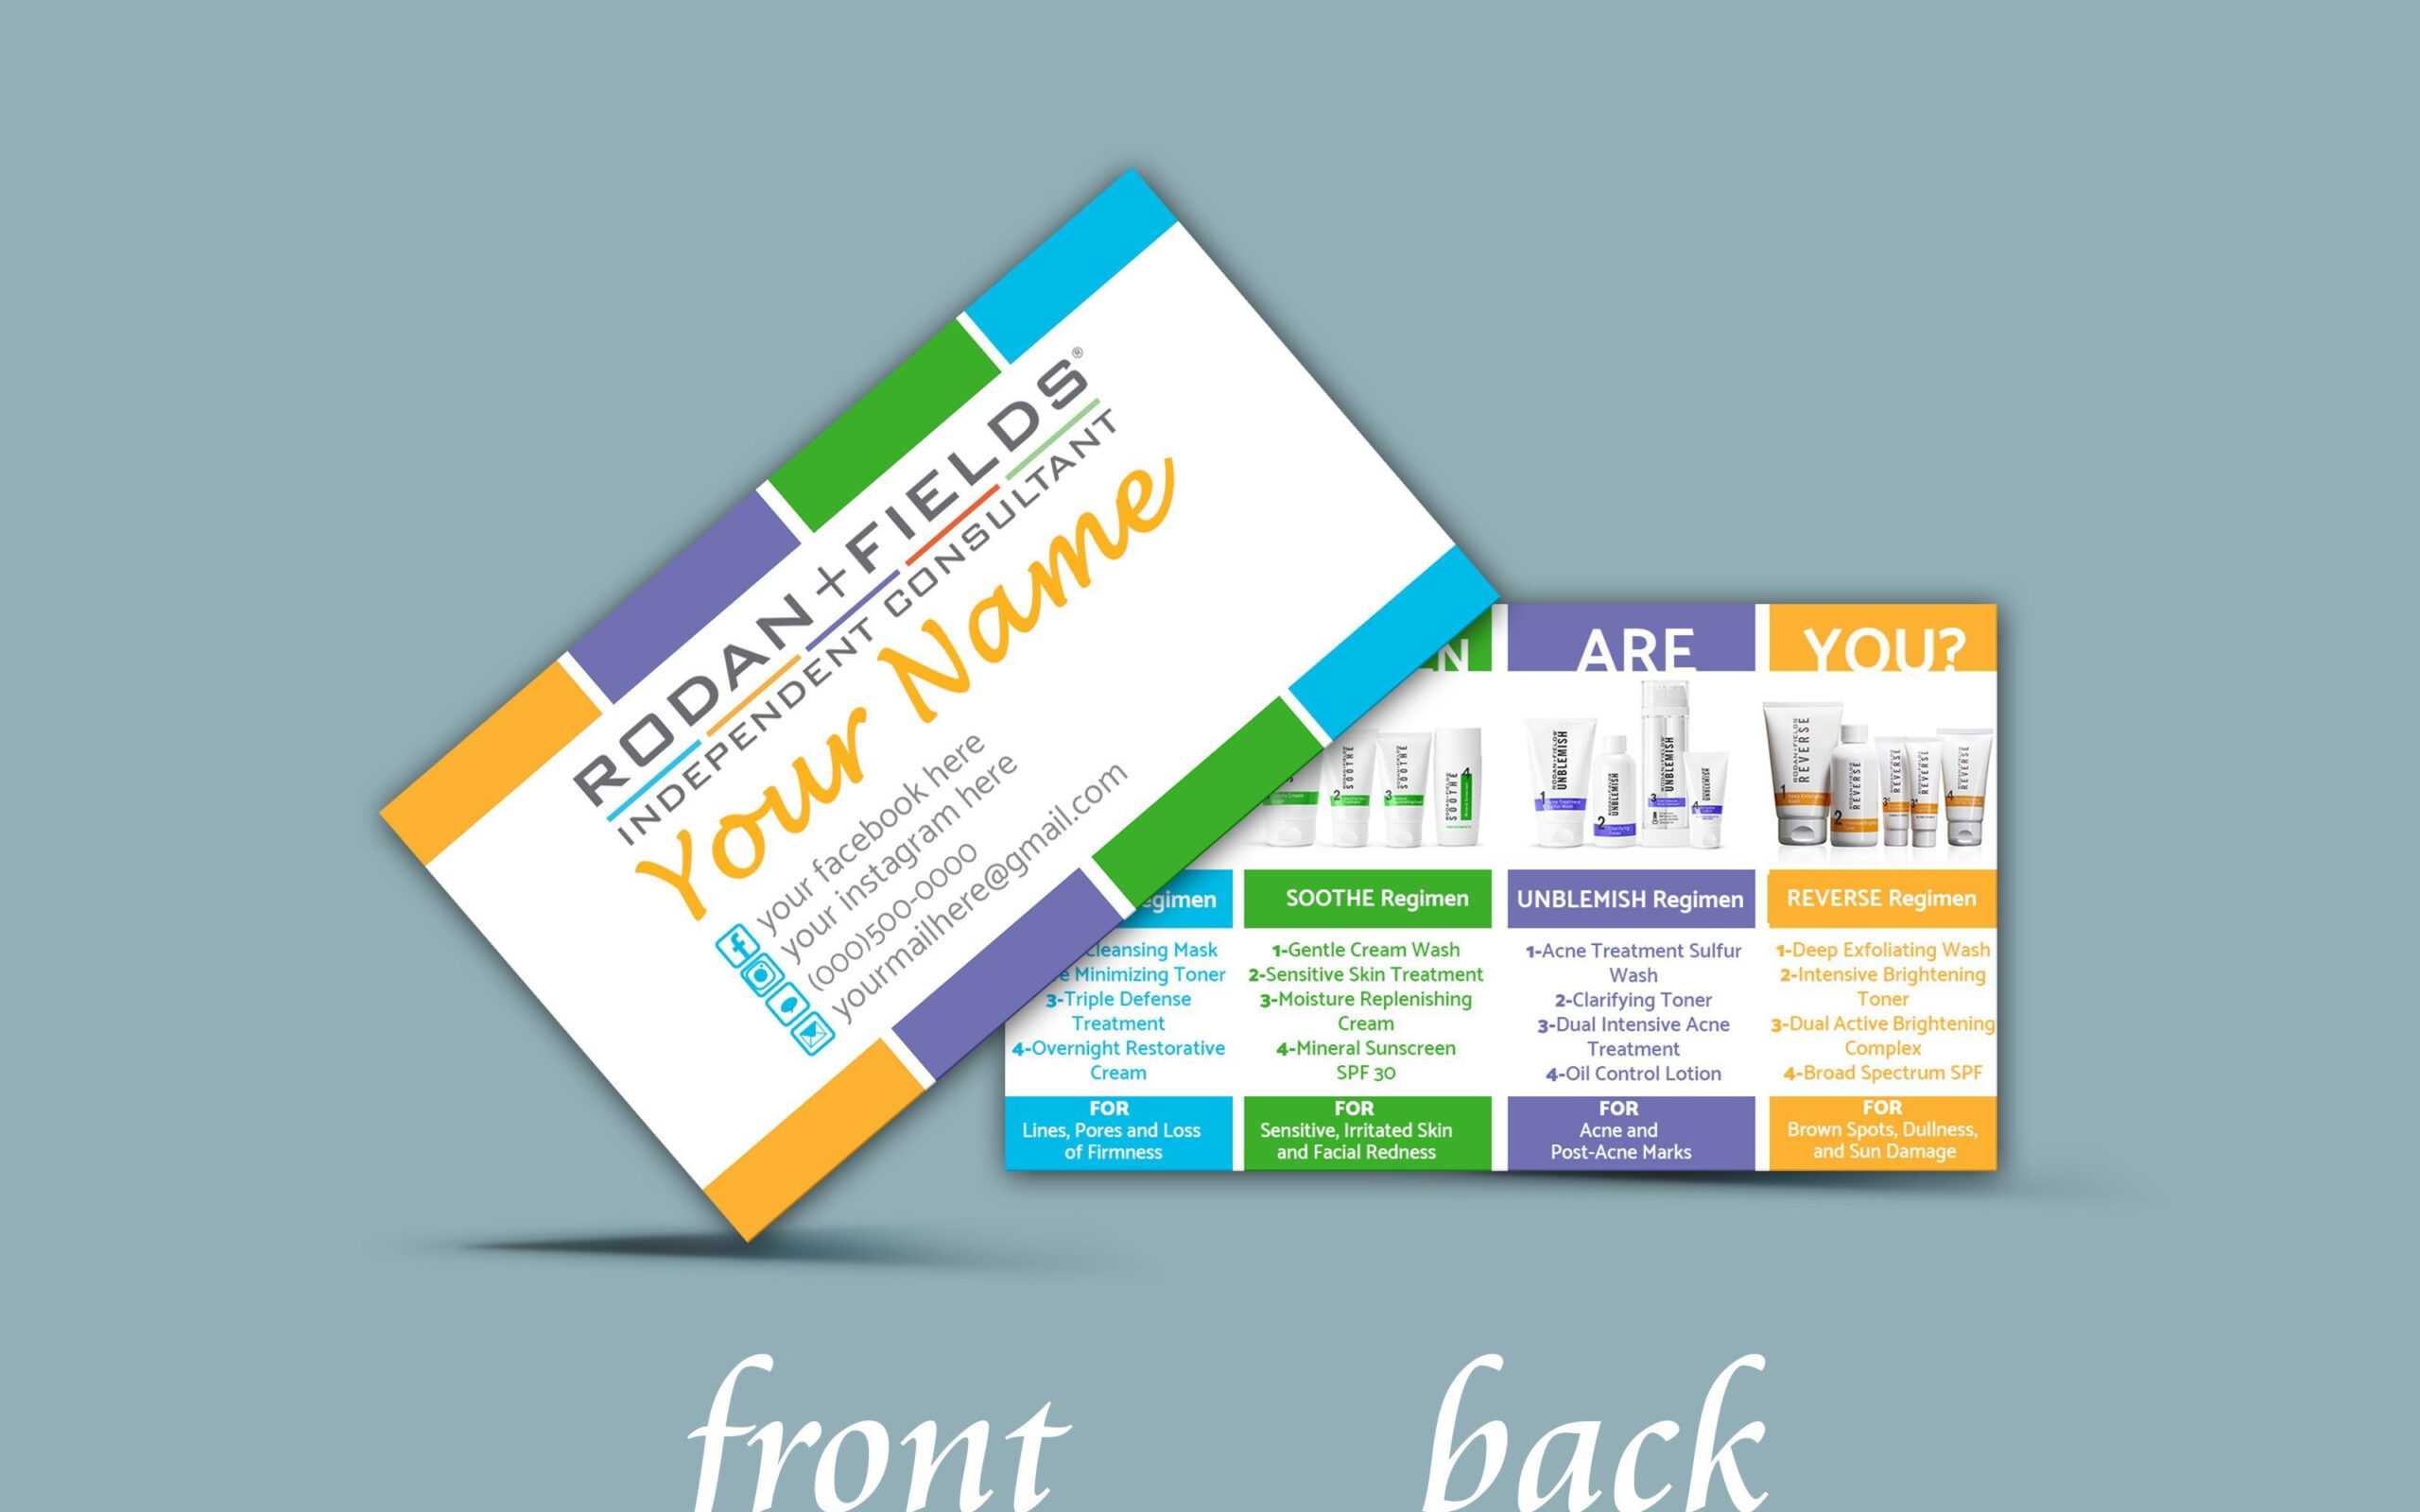 Using Facebook Logo On Business Cards Like Us Group Link Can Intended For Rodan And Fields Business Card Template